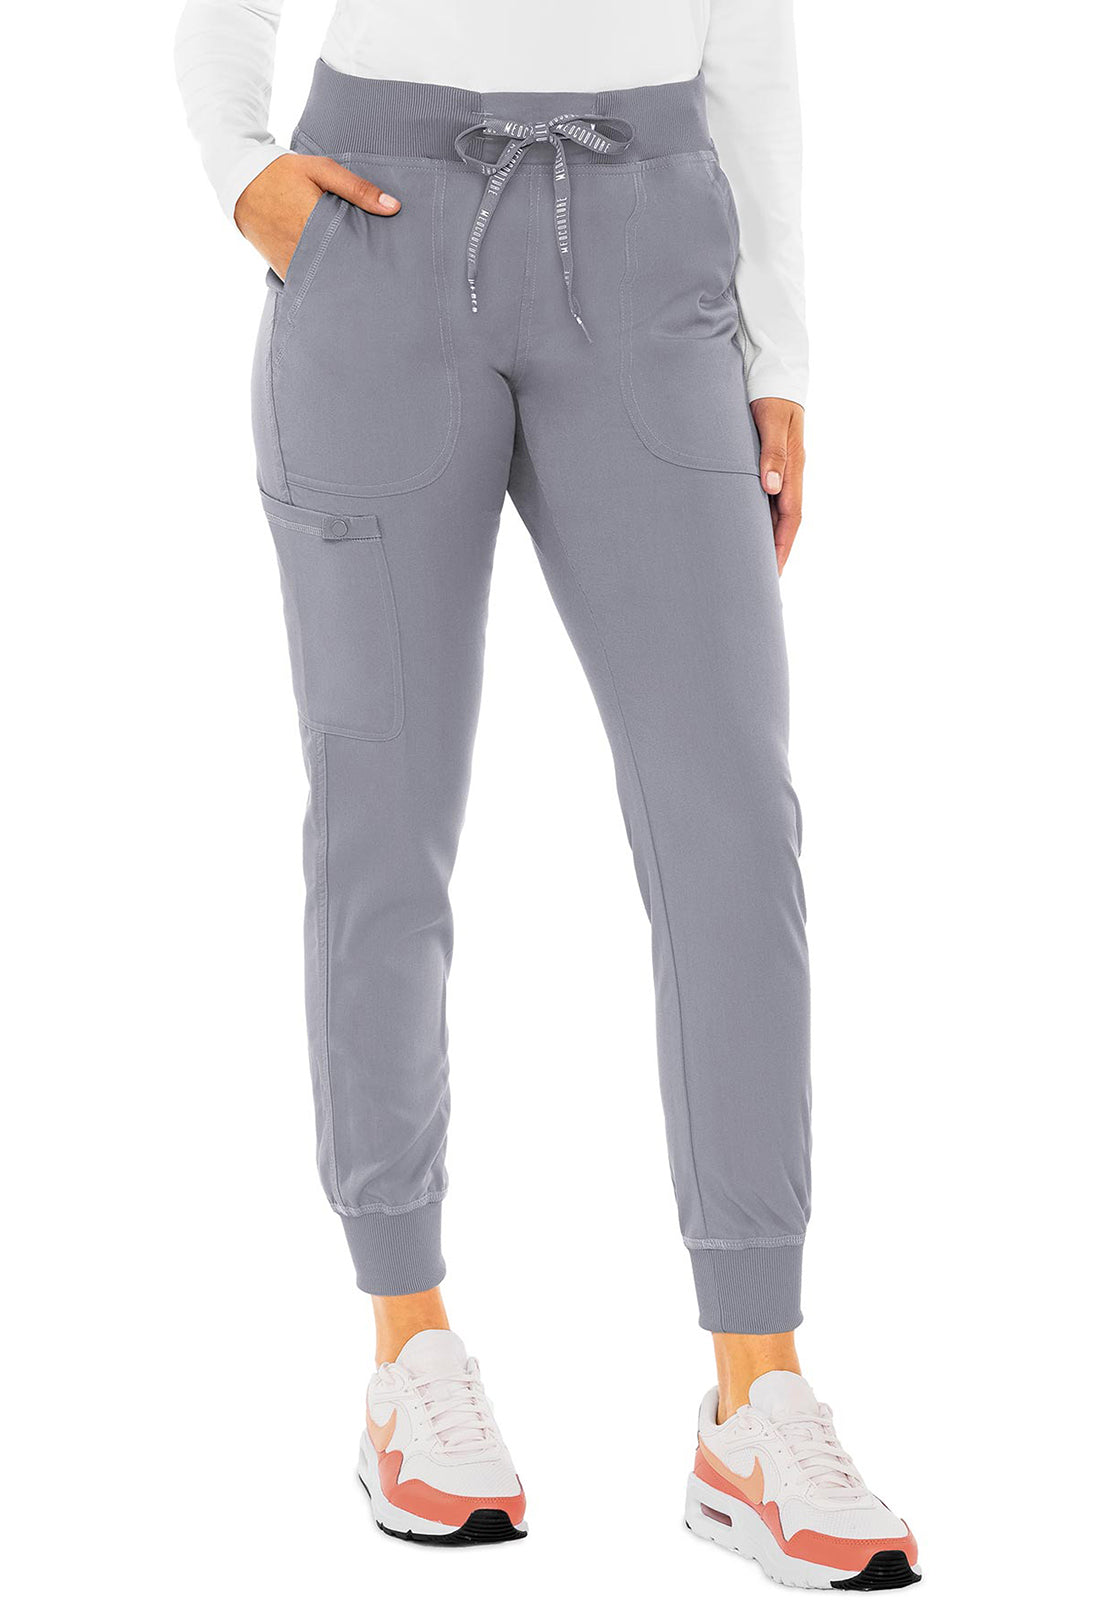 Med Couture Touch Yoga Jogger Pant (15 Colors XS-3XL Regular Length)